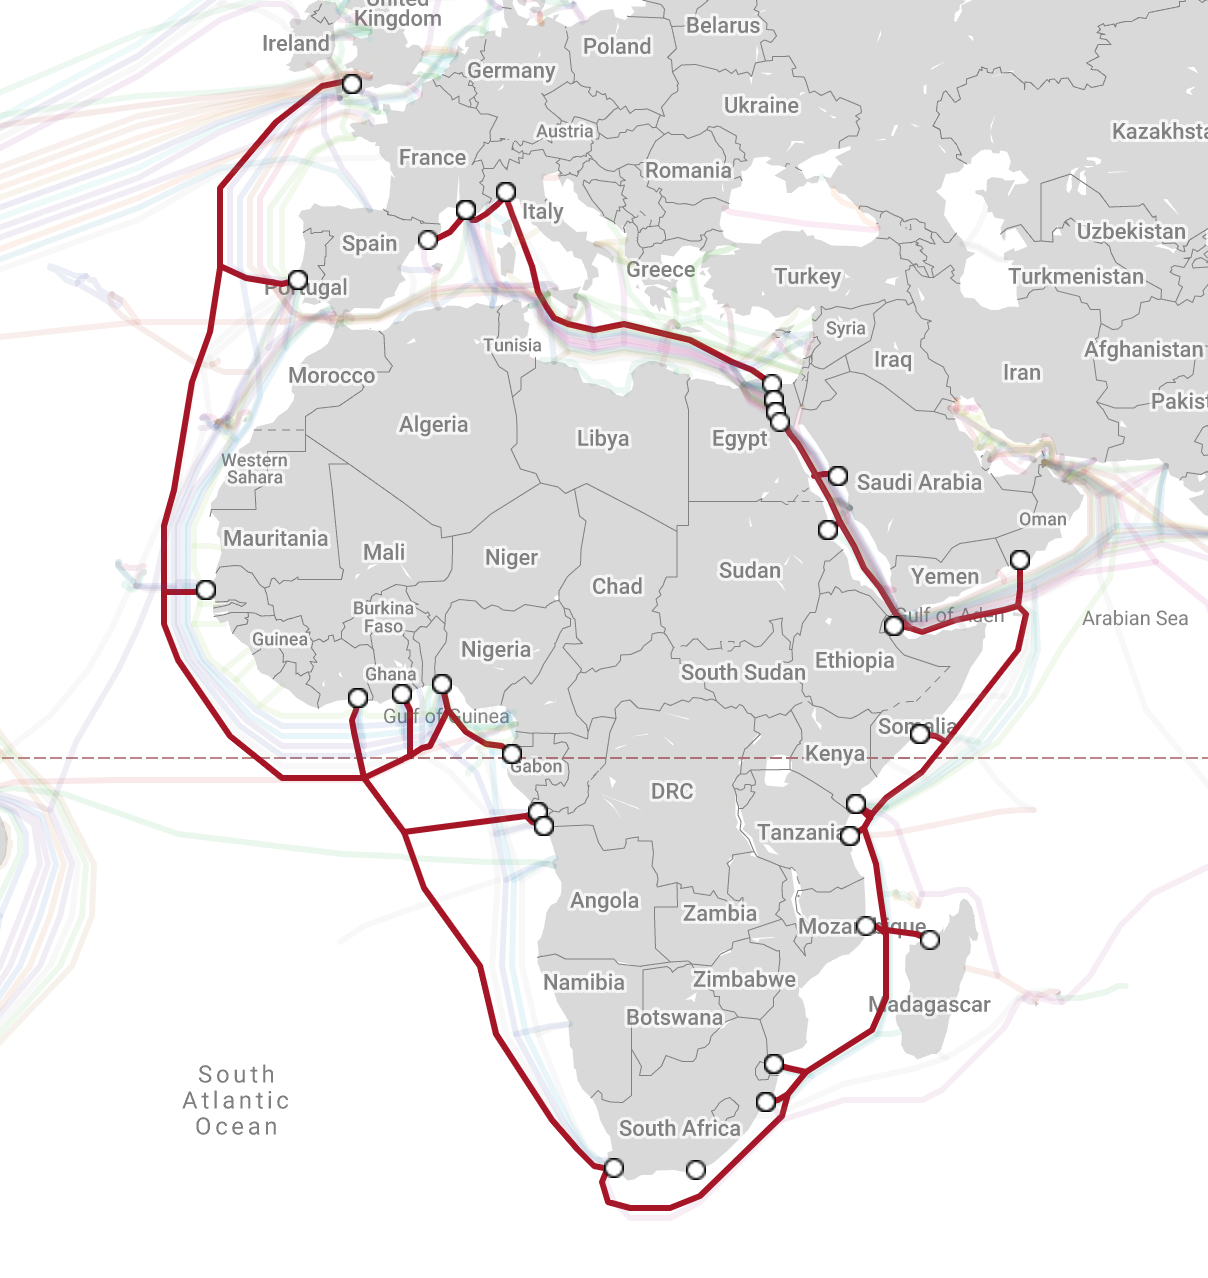 telegeography submarine cable map 2020